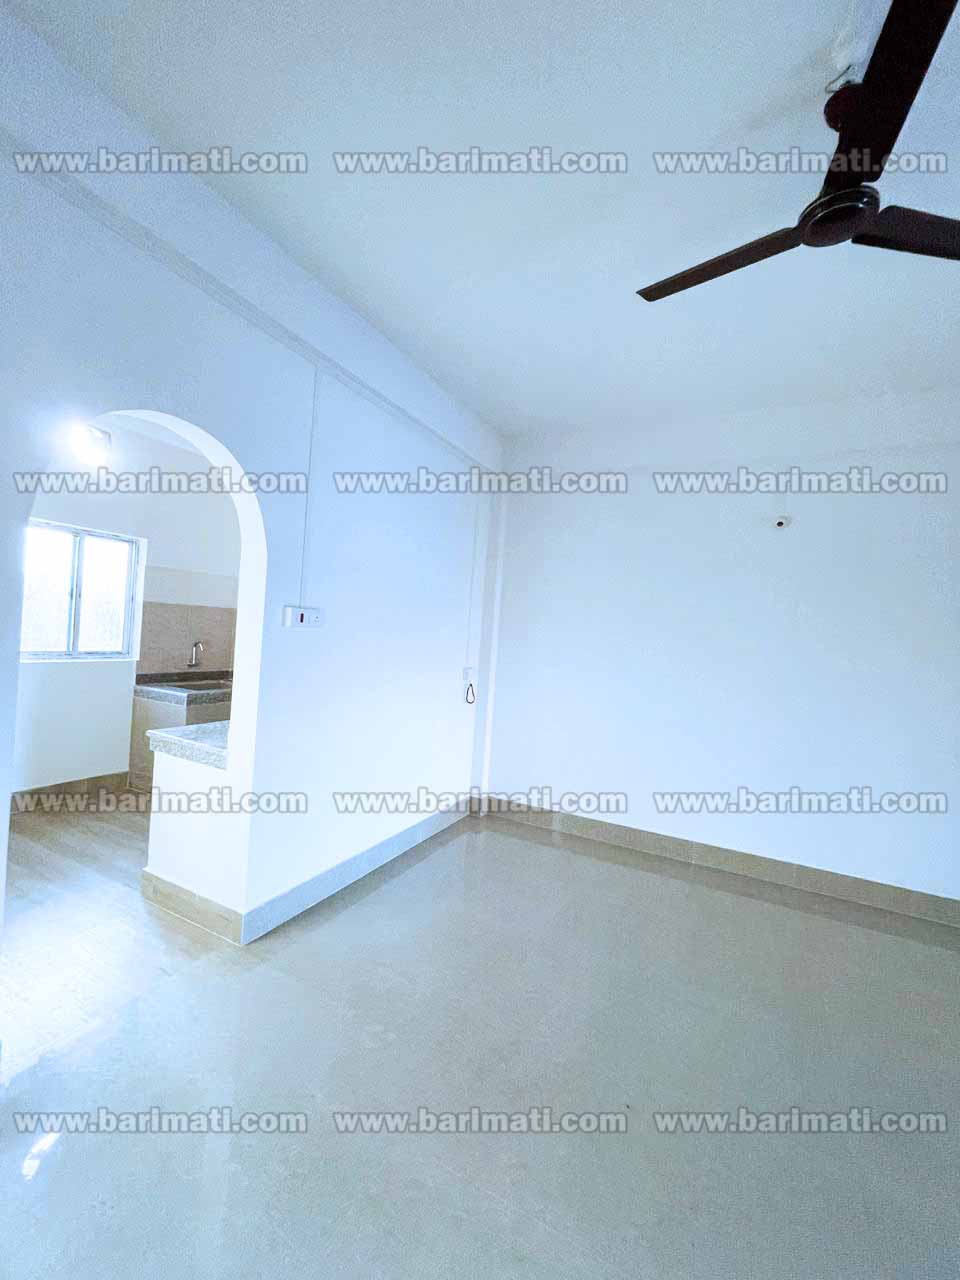 Picture of a well-maintained 2 BHK flat for rent, situated in the vicinity of Dibrugarh University in Duarachuk, with a monthly rent under 15000